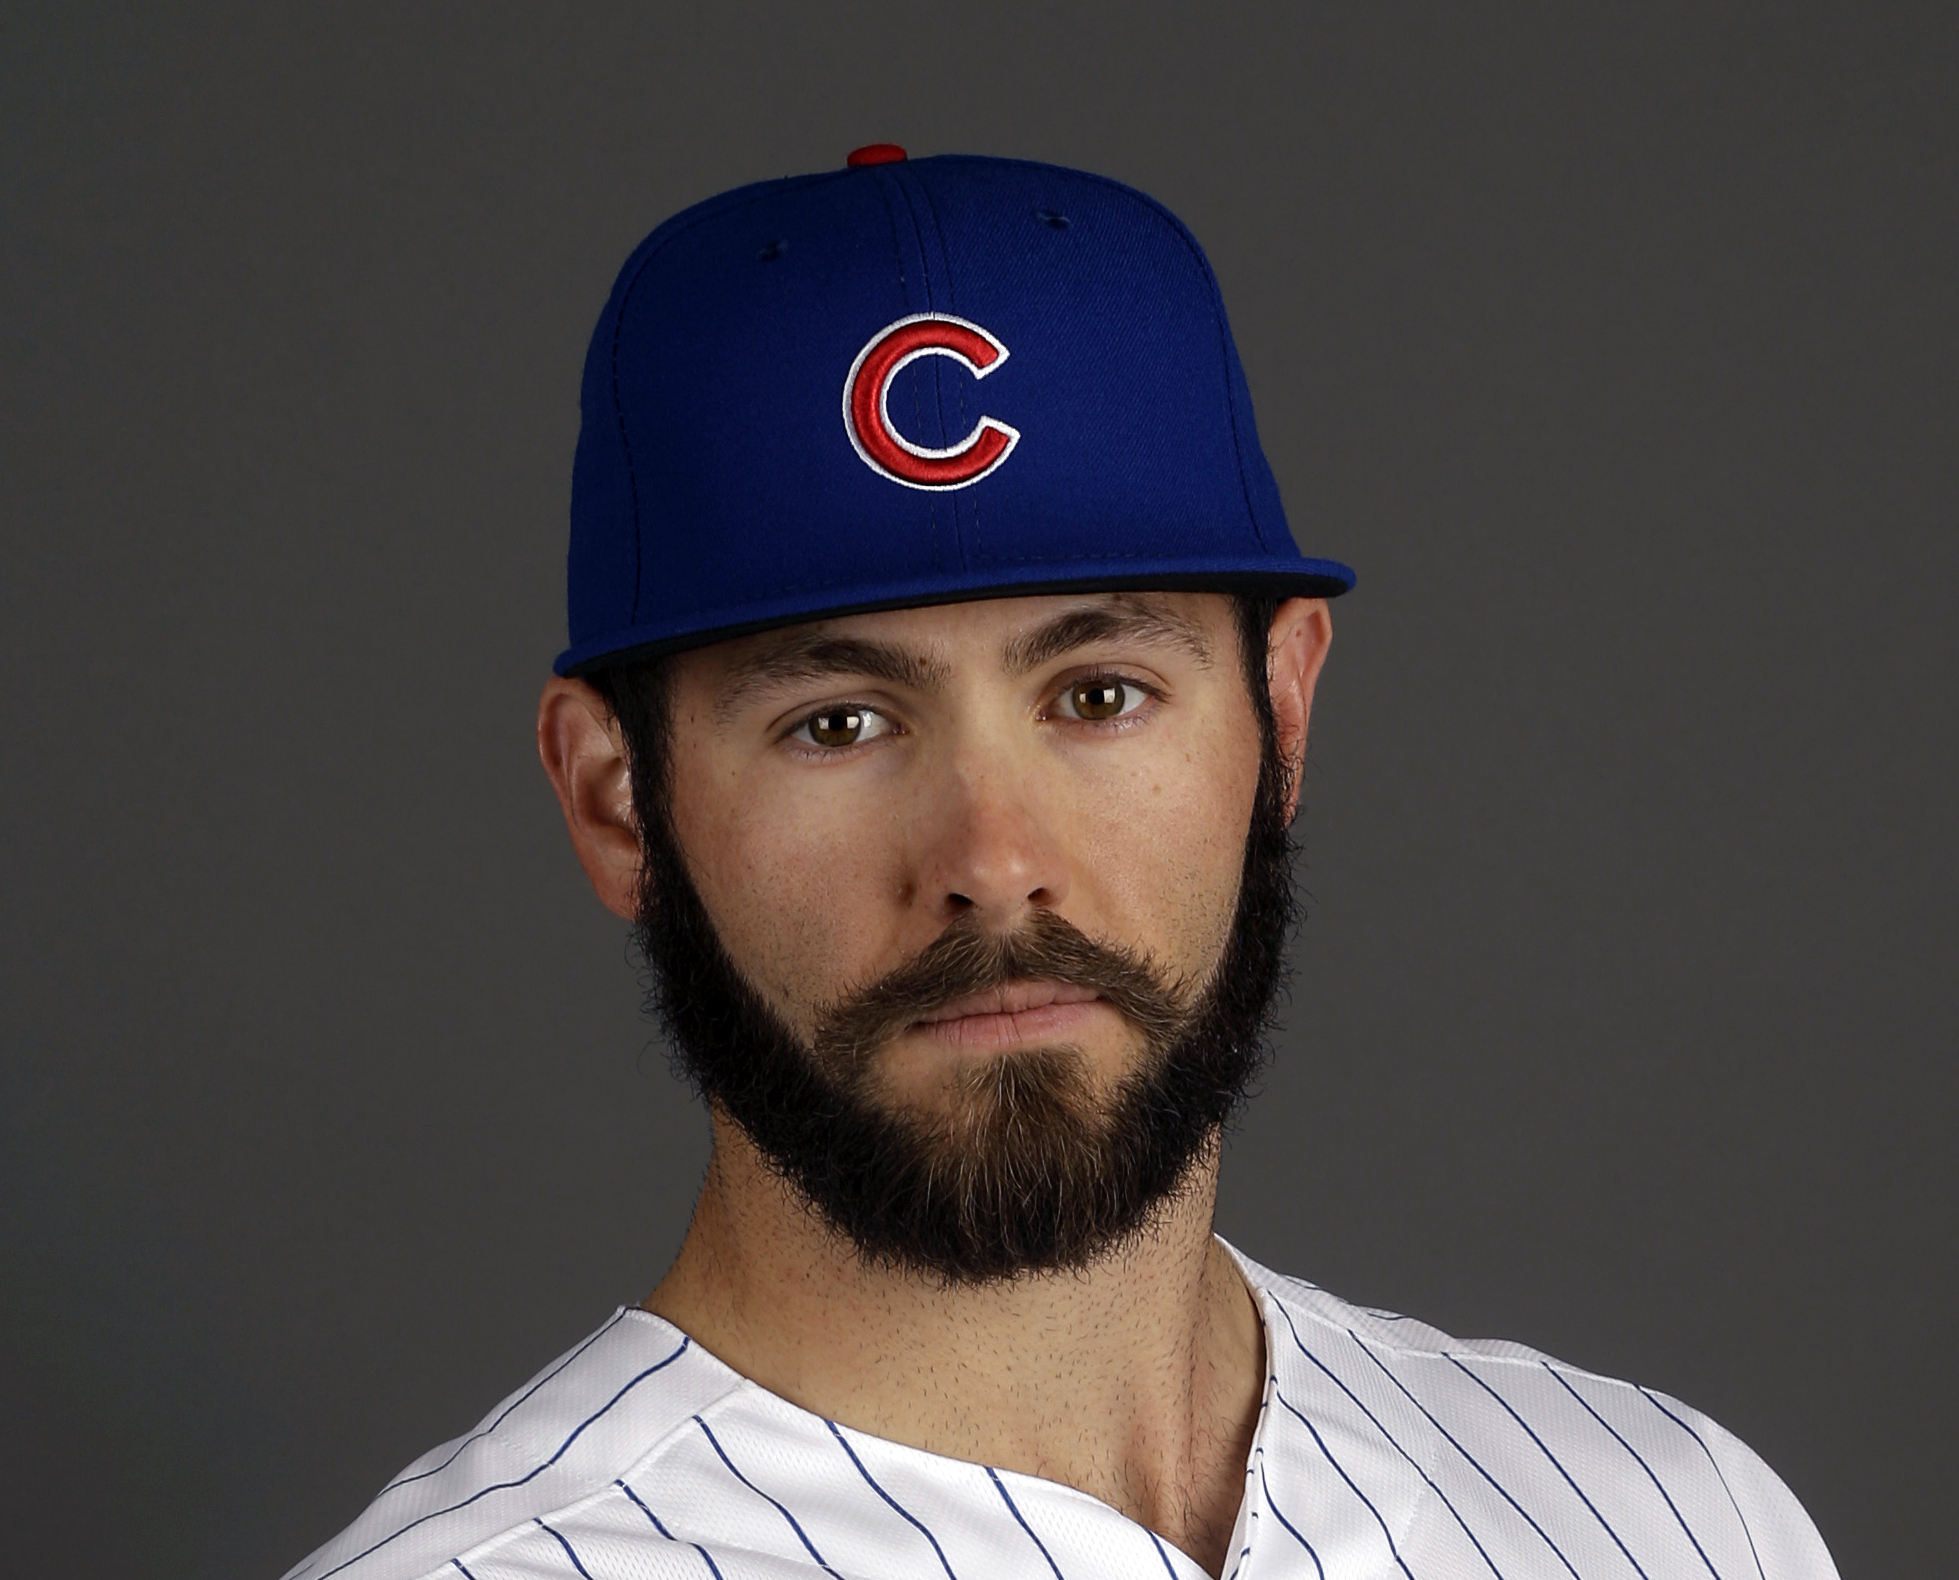 Cubs' Arrieta beats Dodgers' duo for NL Cy Young